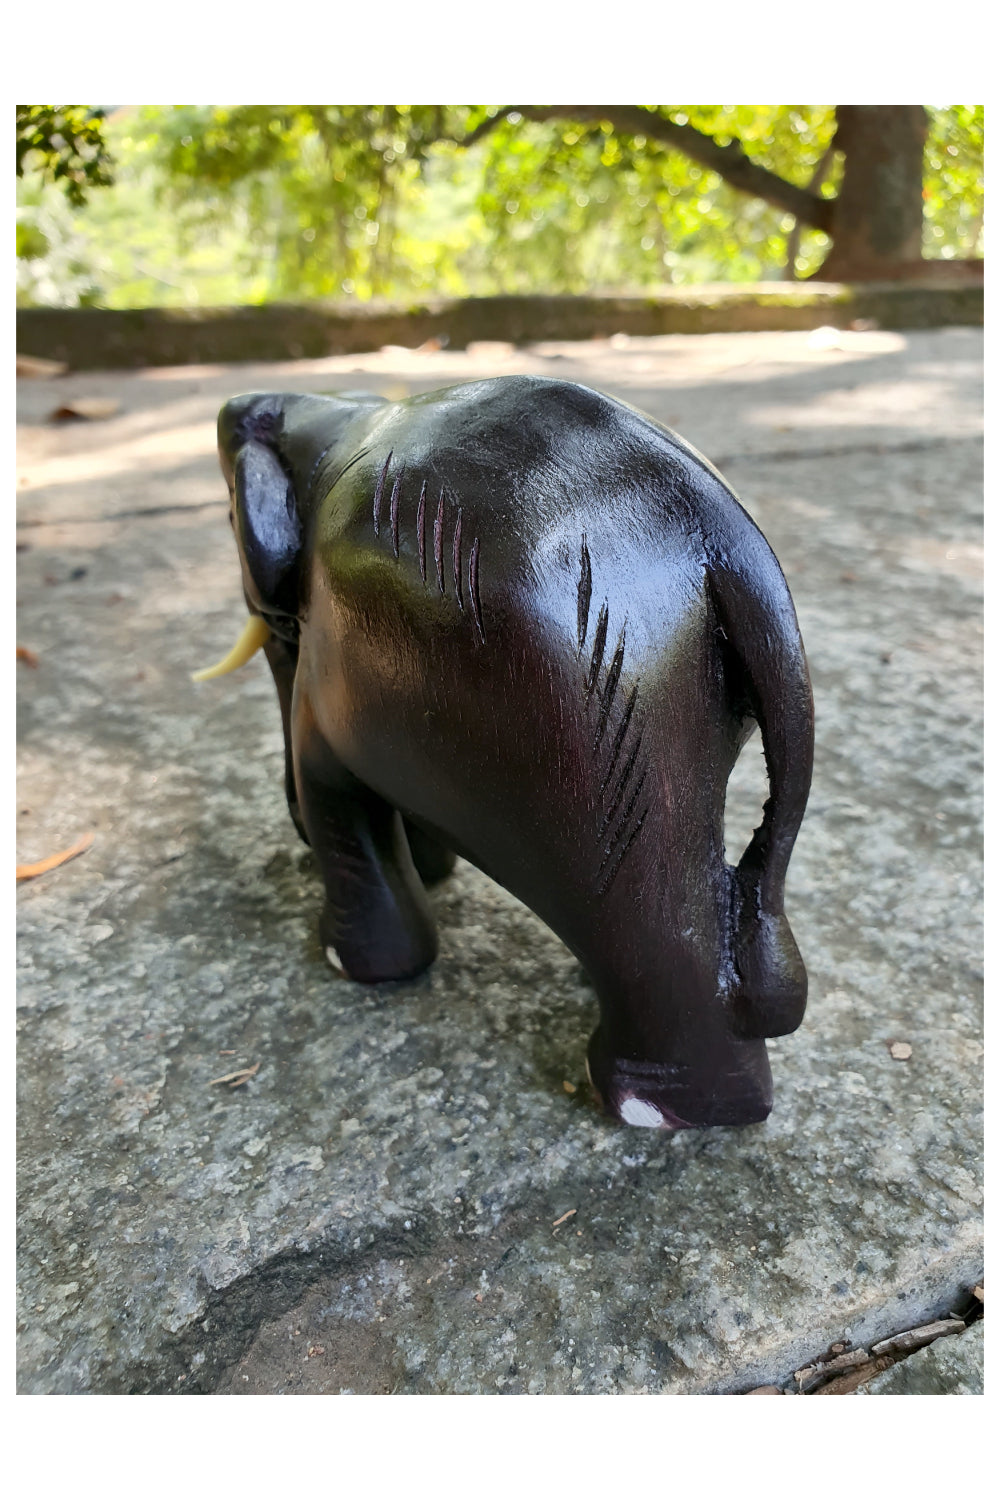 Southloom Handmade Elephant Handicraft (Carved from Mahogany Wood) 4 Inches